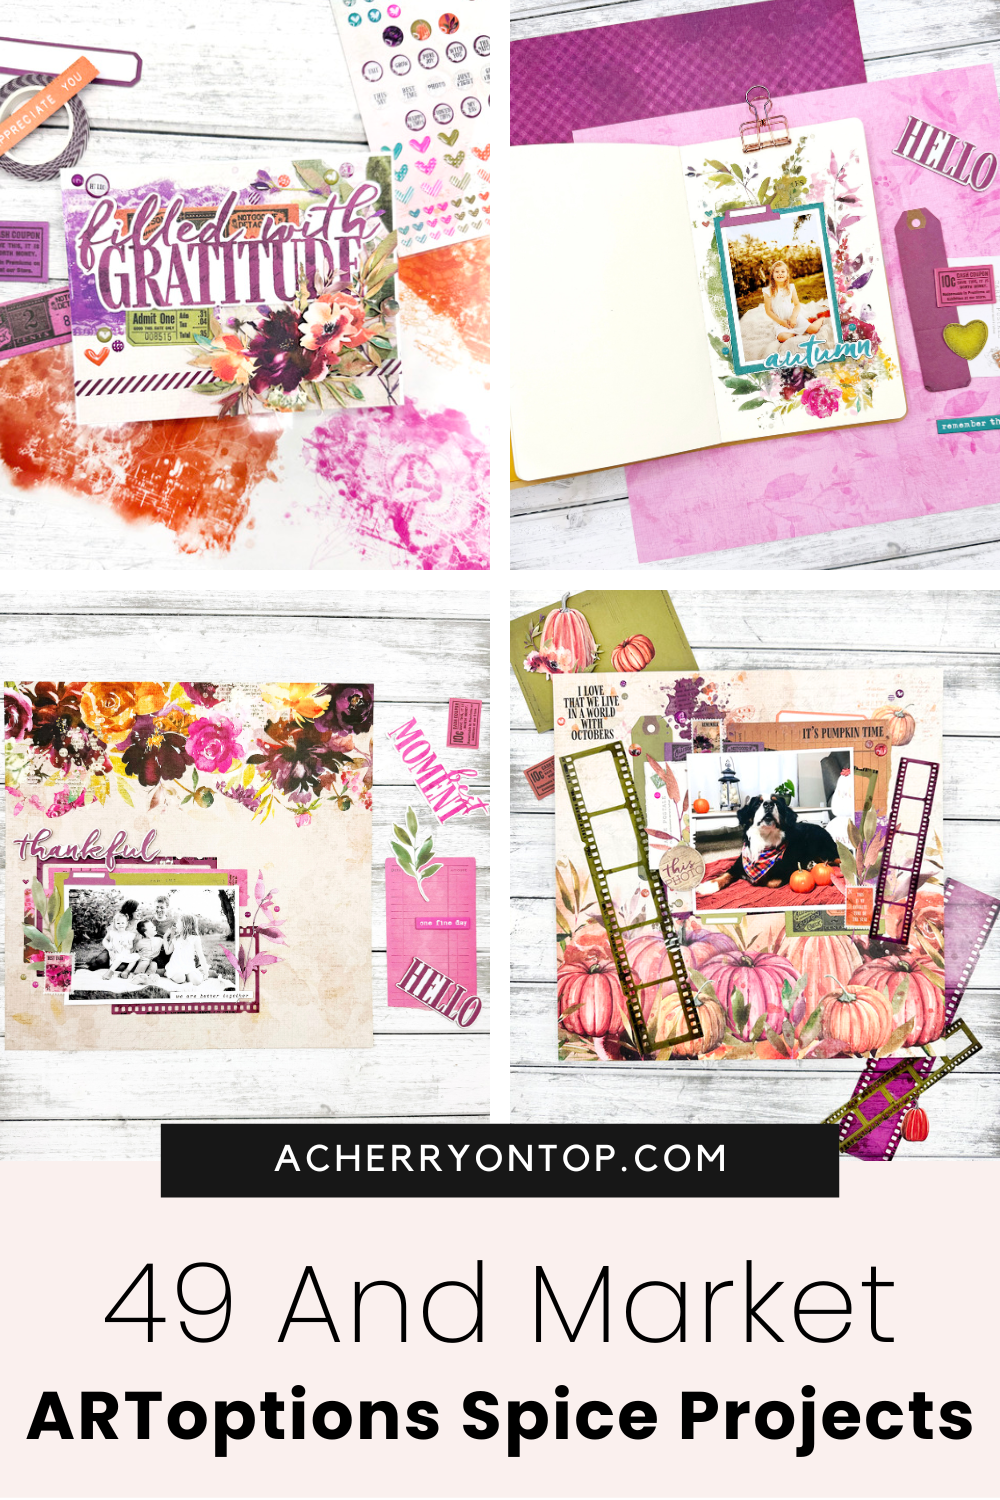 49 and Market Ultimate Page Kit-ARToptions Spice